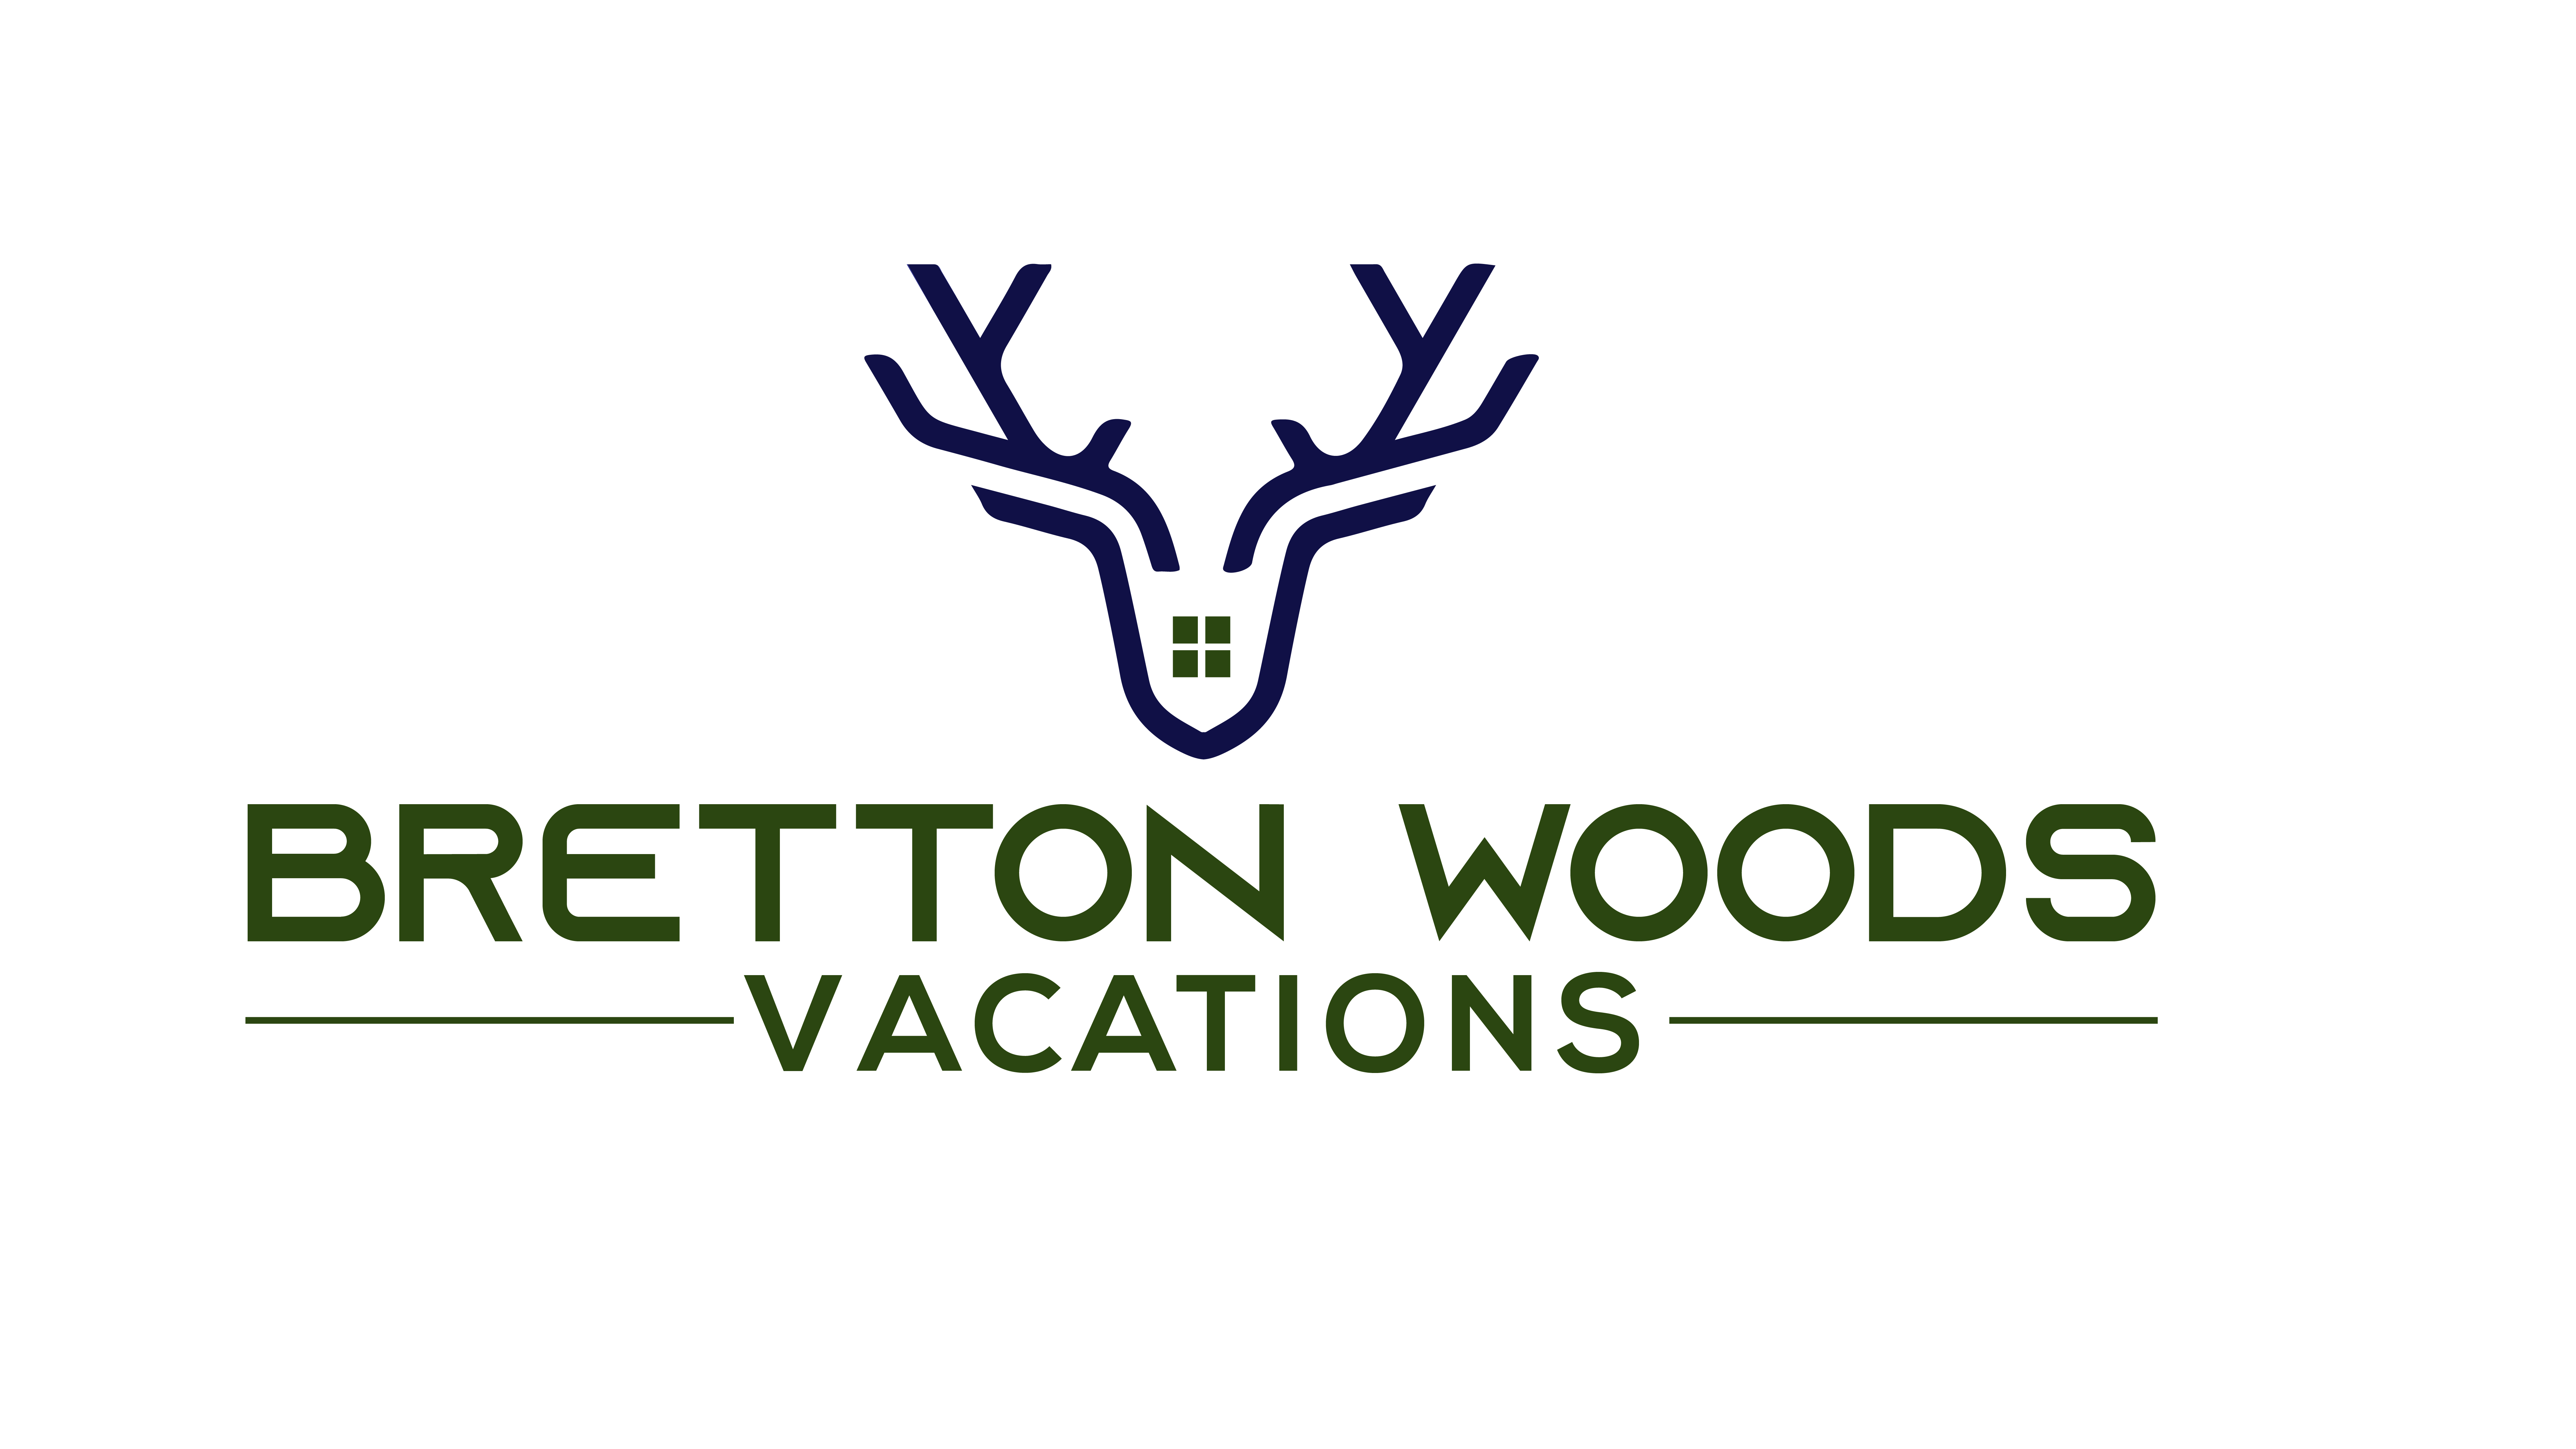 Bretton Woods Vacations - The Premier White Mountains New Hampshire Vacation Rental Service!